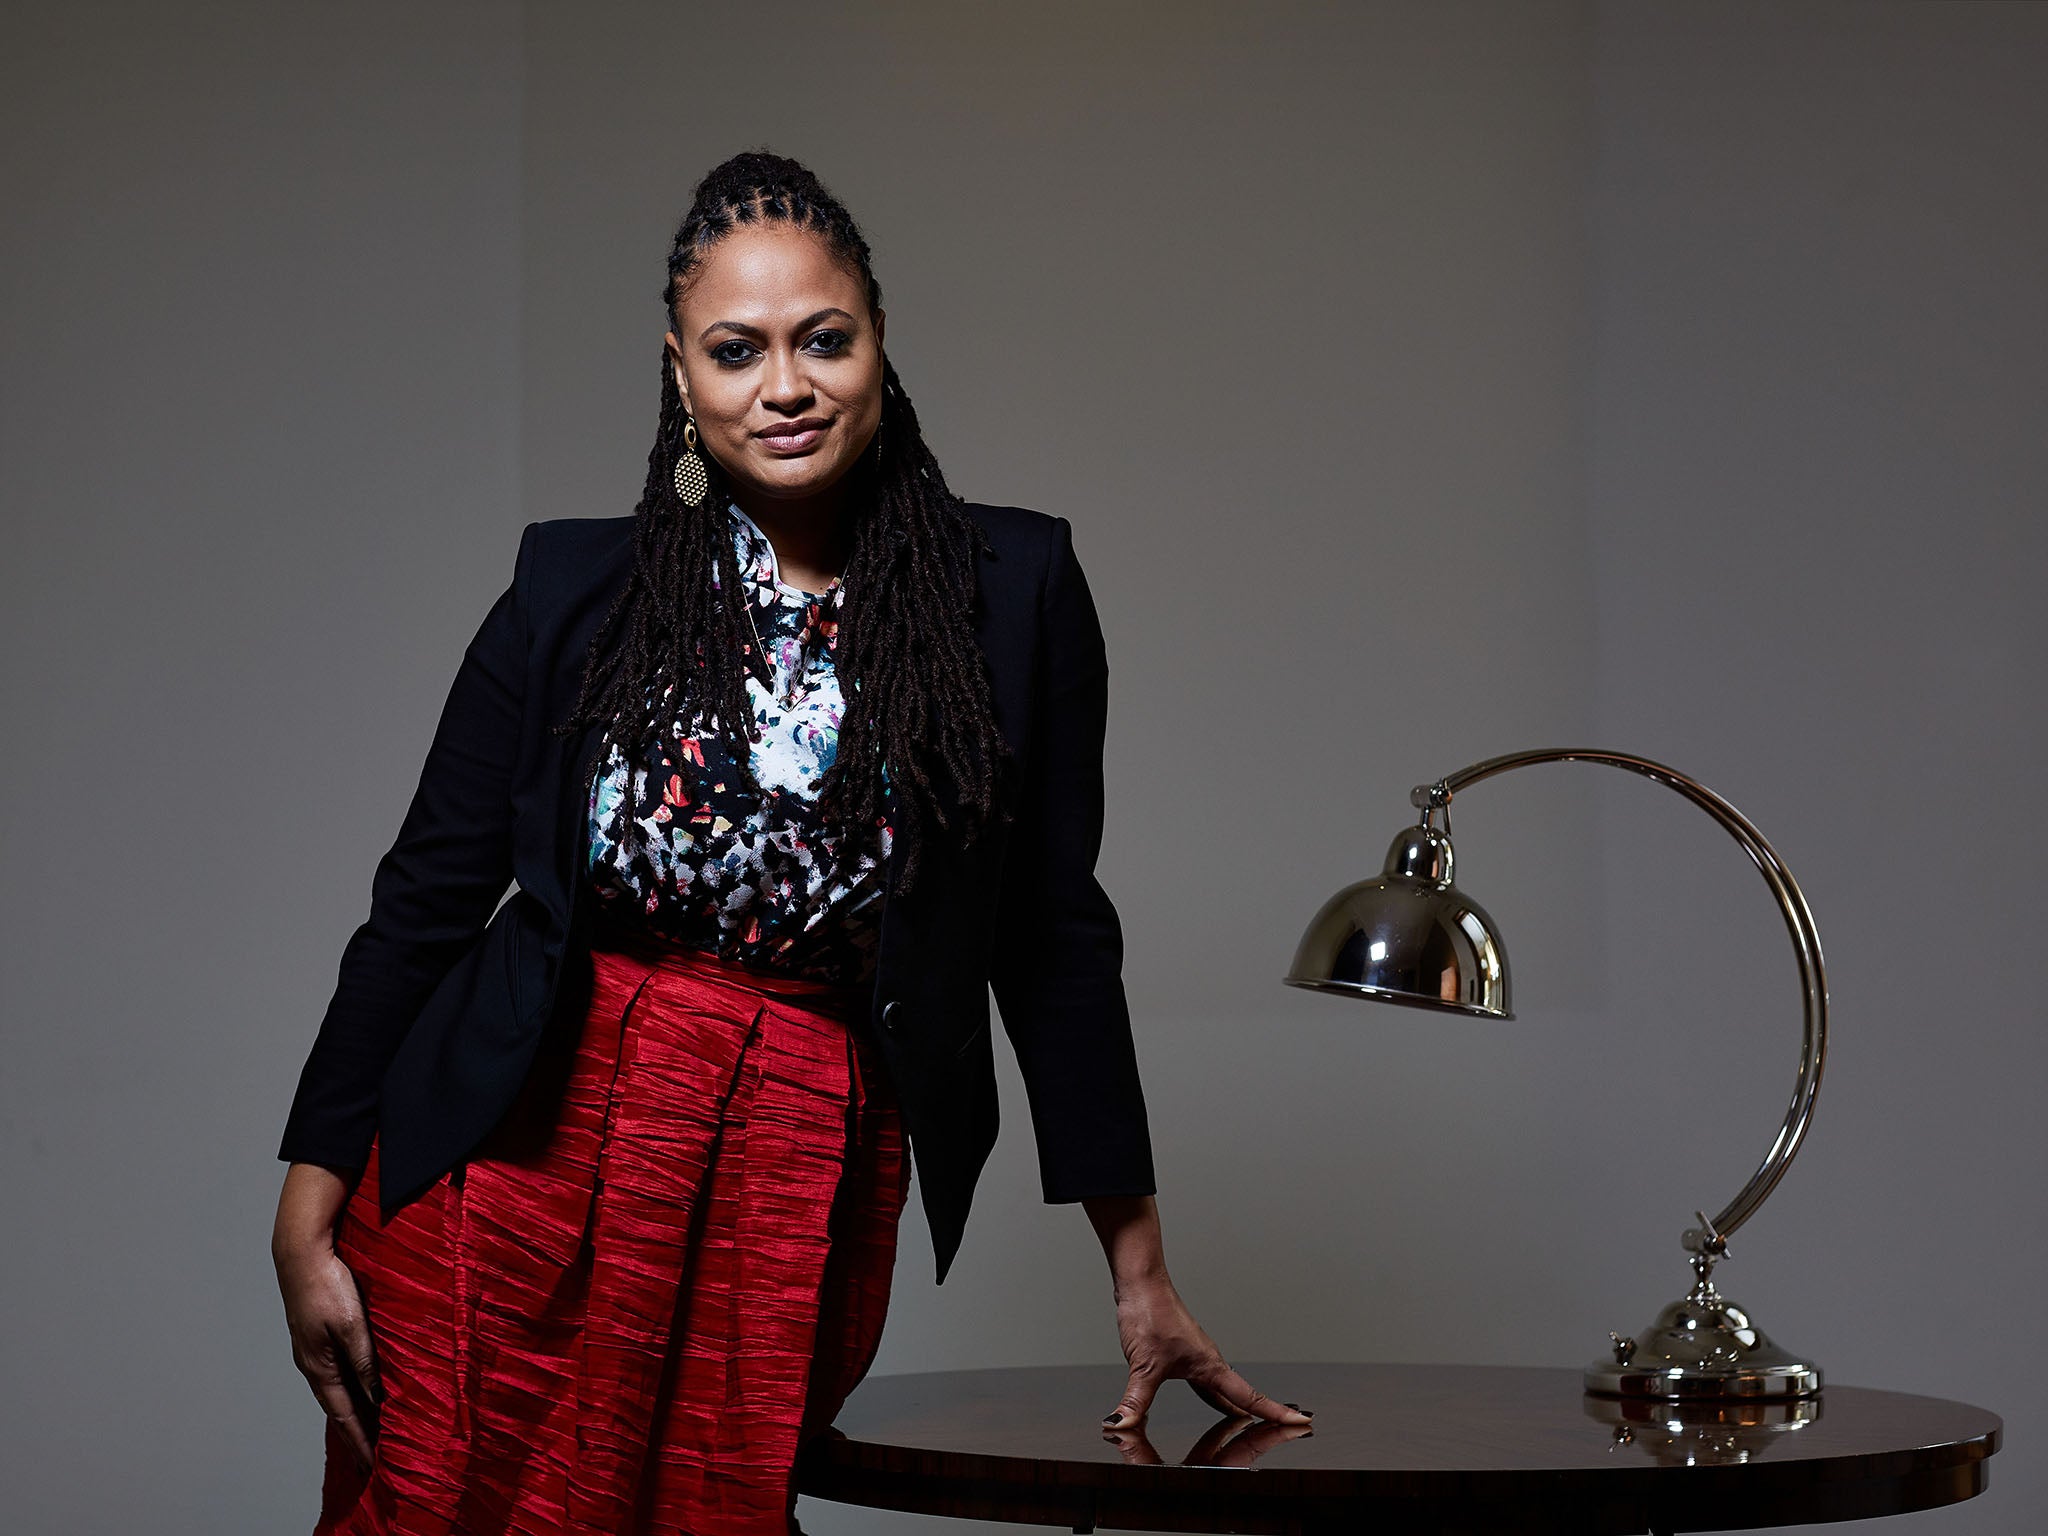 Director Ava DuVernay, whose feature film Selma is nominated in this year's academy awards, photographed at London's Corinthian Hotel. (Justin Sutcliffe)